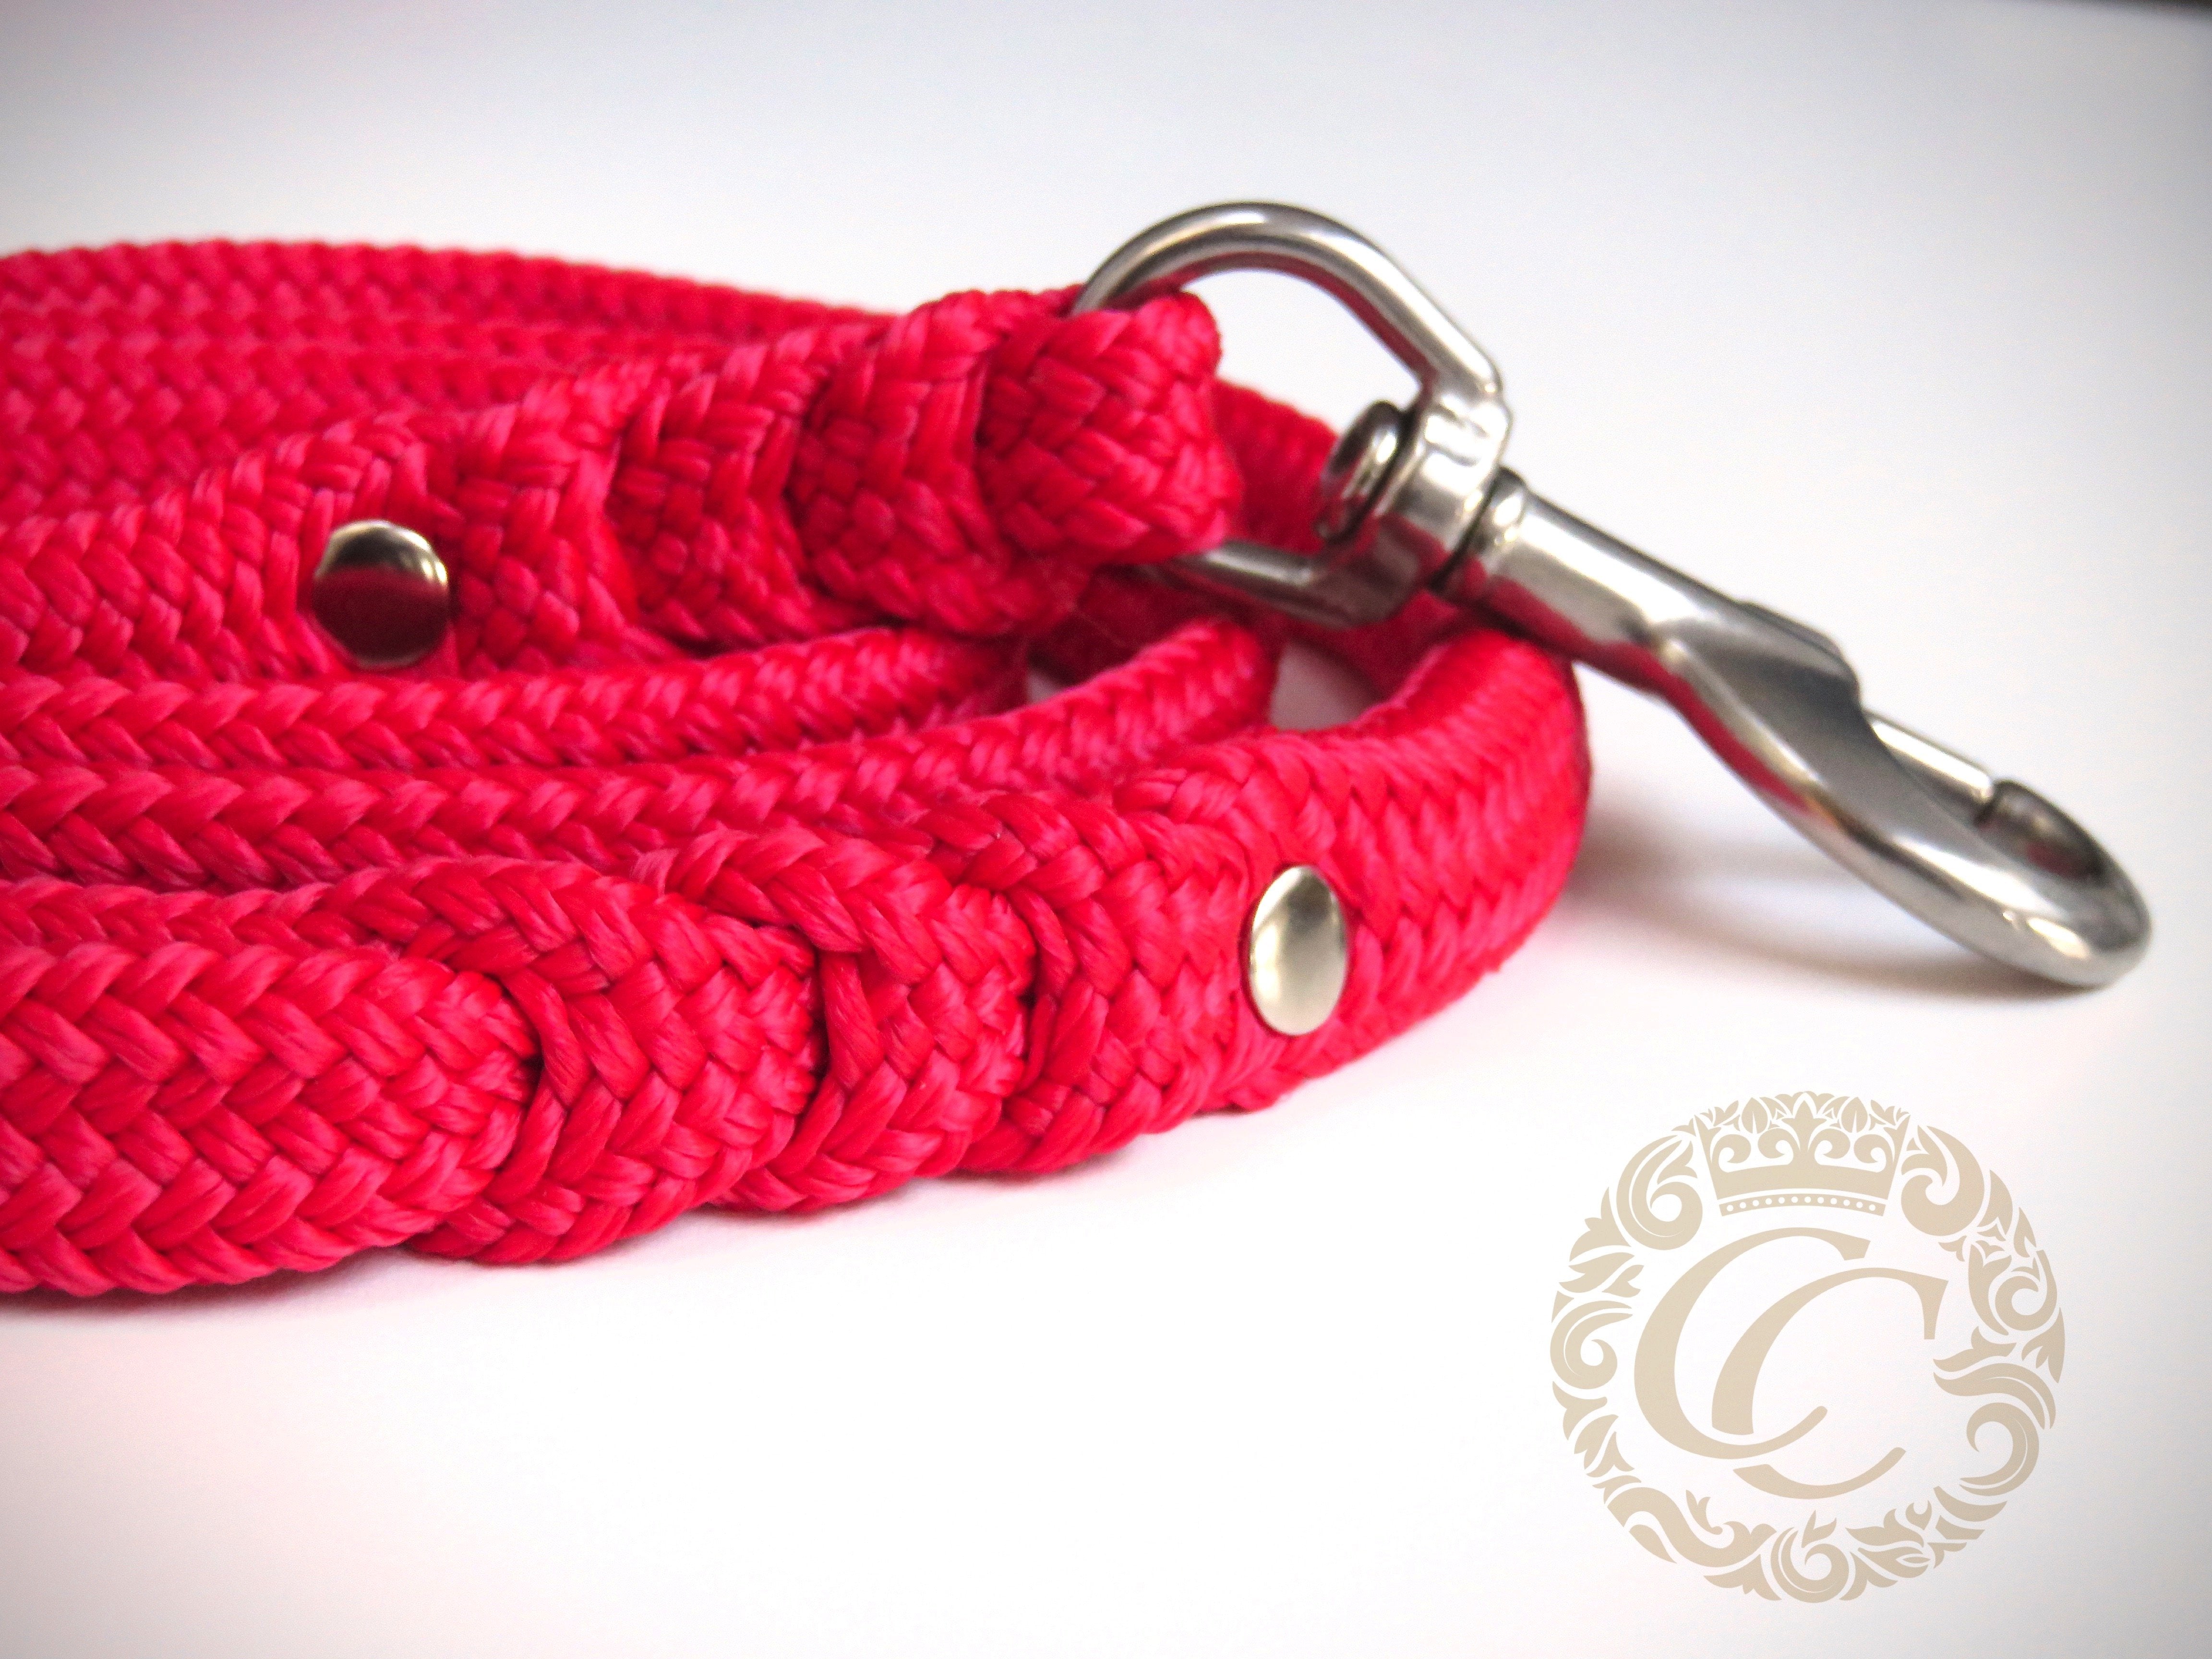 Dog leash for medium and large dogs Red | Paracord dog leash | Handmade leash for dogs |Red dog leash | Honden leibanden |Paracord leiband voor honden | Washable dog leash | Red paracord dog leash | Lead for dog | Snapleash | Dog lead | Custom made dog leashes | CollarCrafts | Leashes and collars